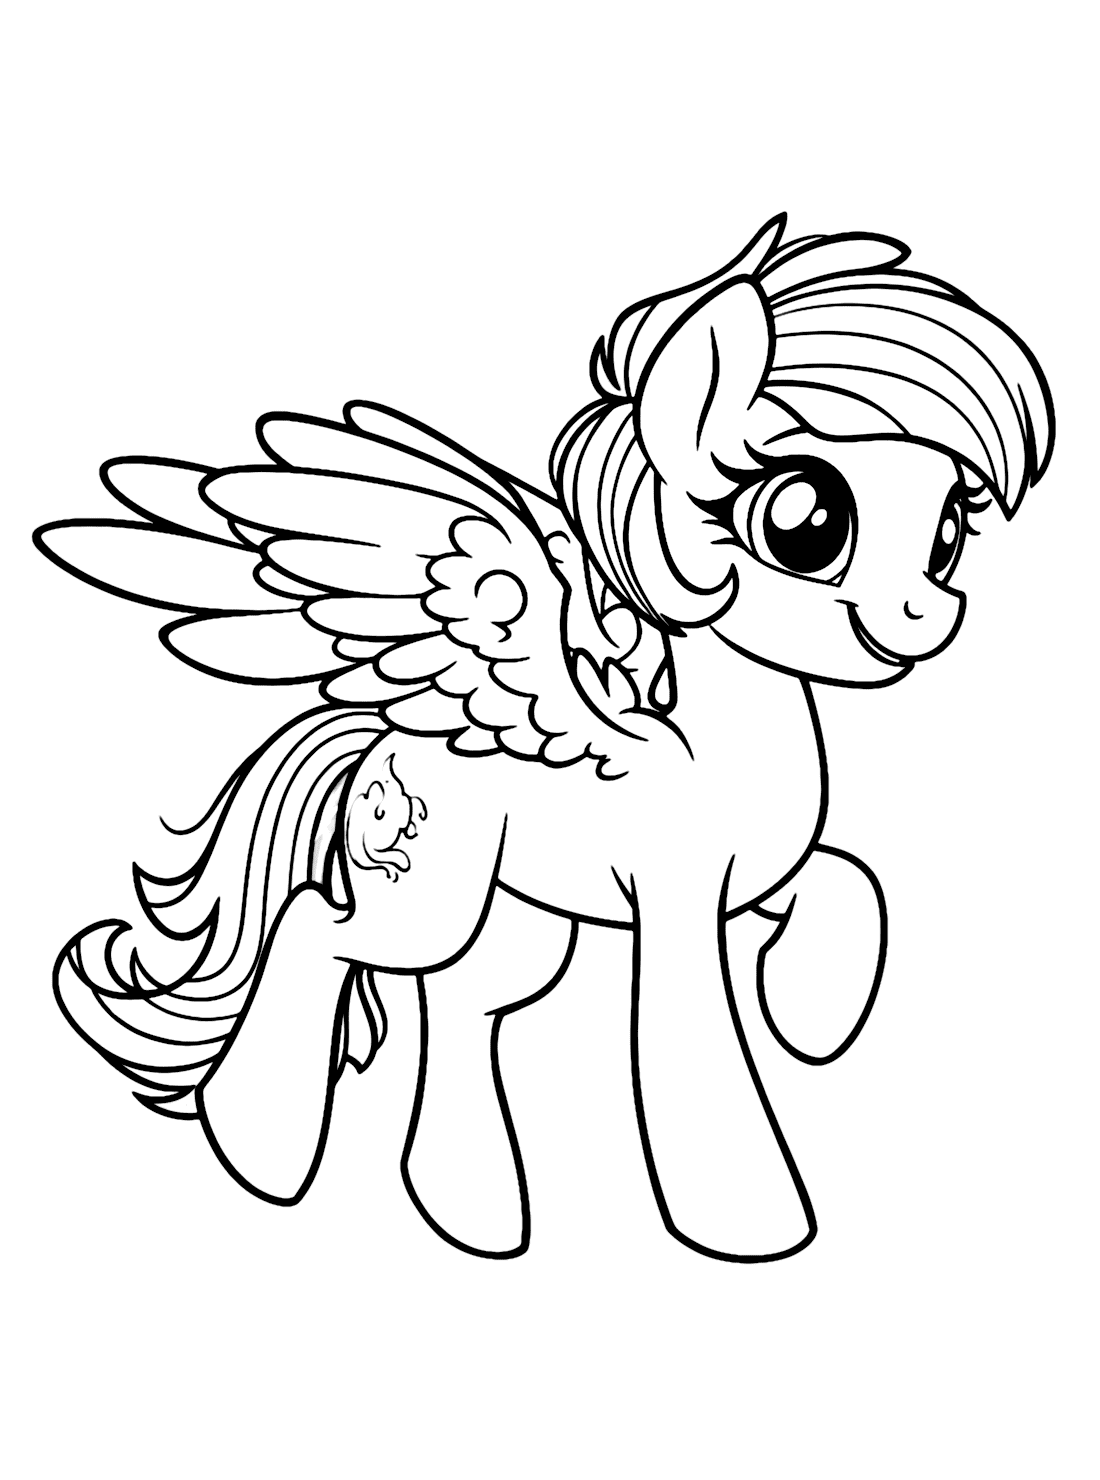 Printable Rainbow Dash Coloring Pages